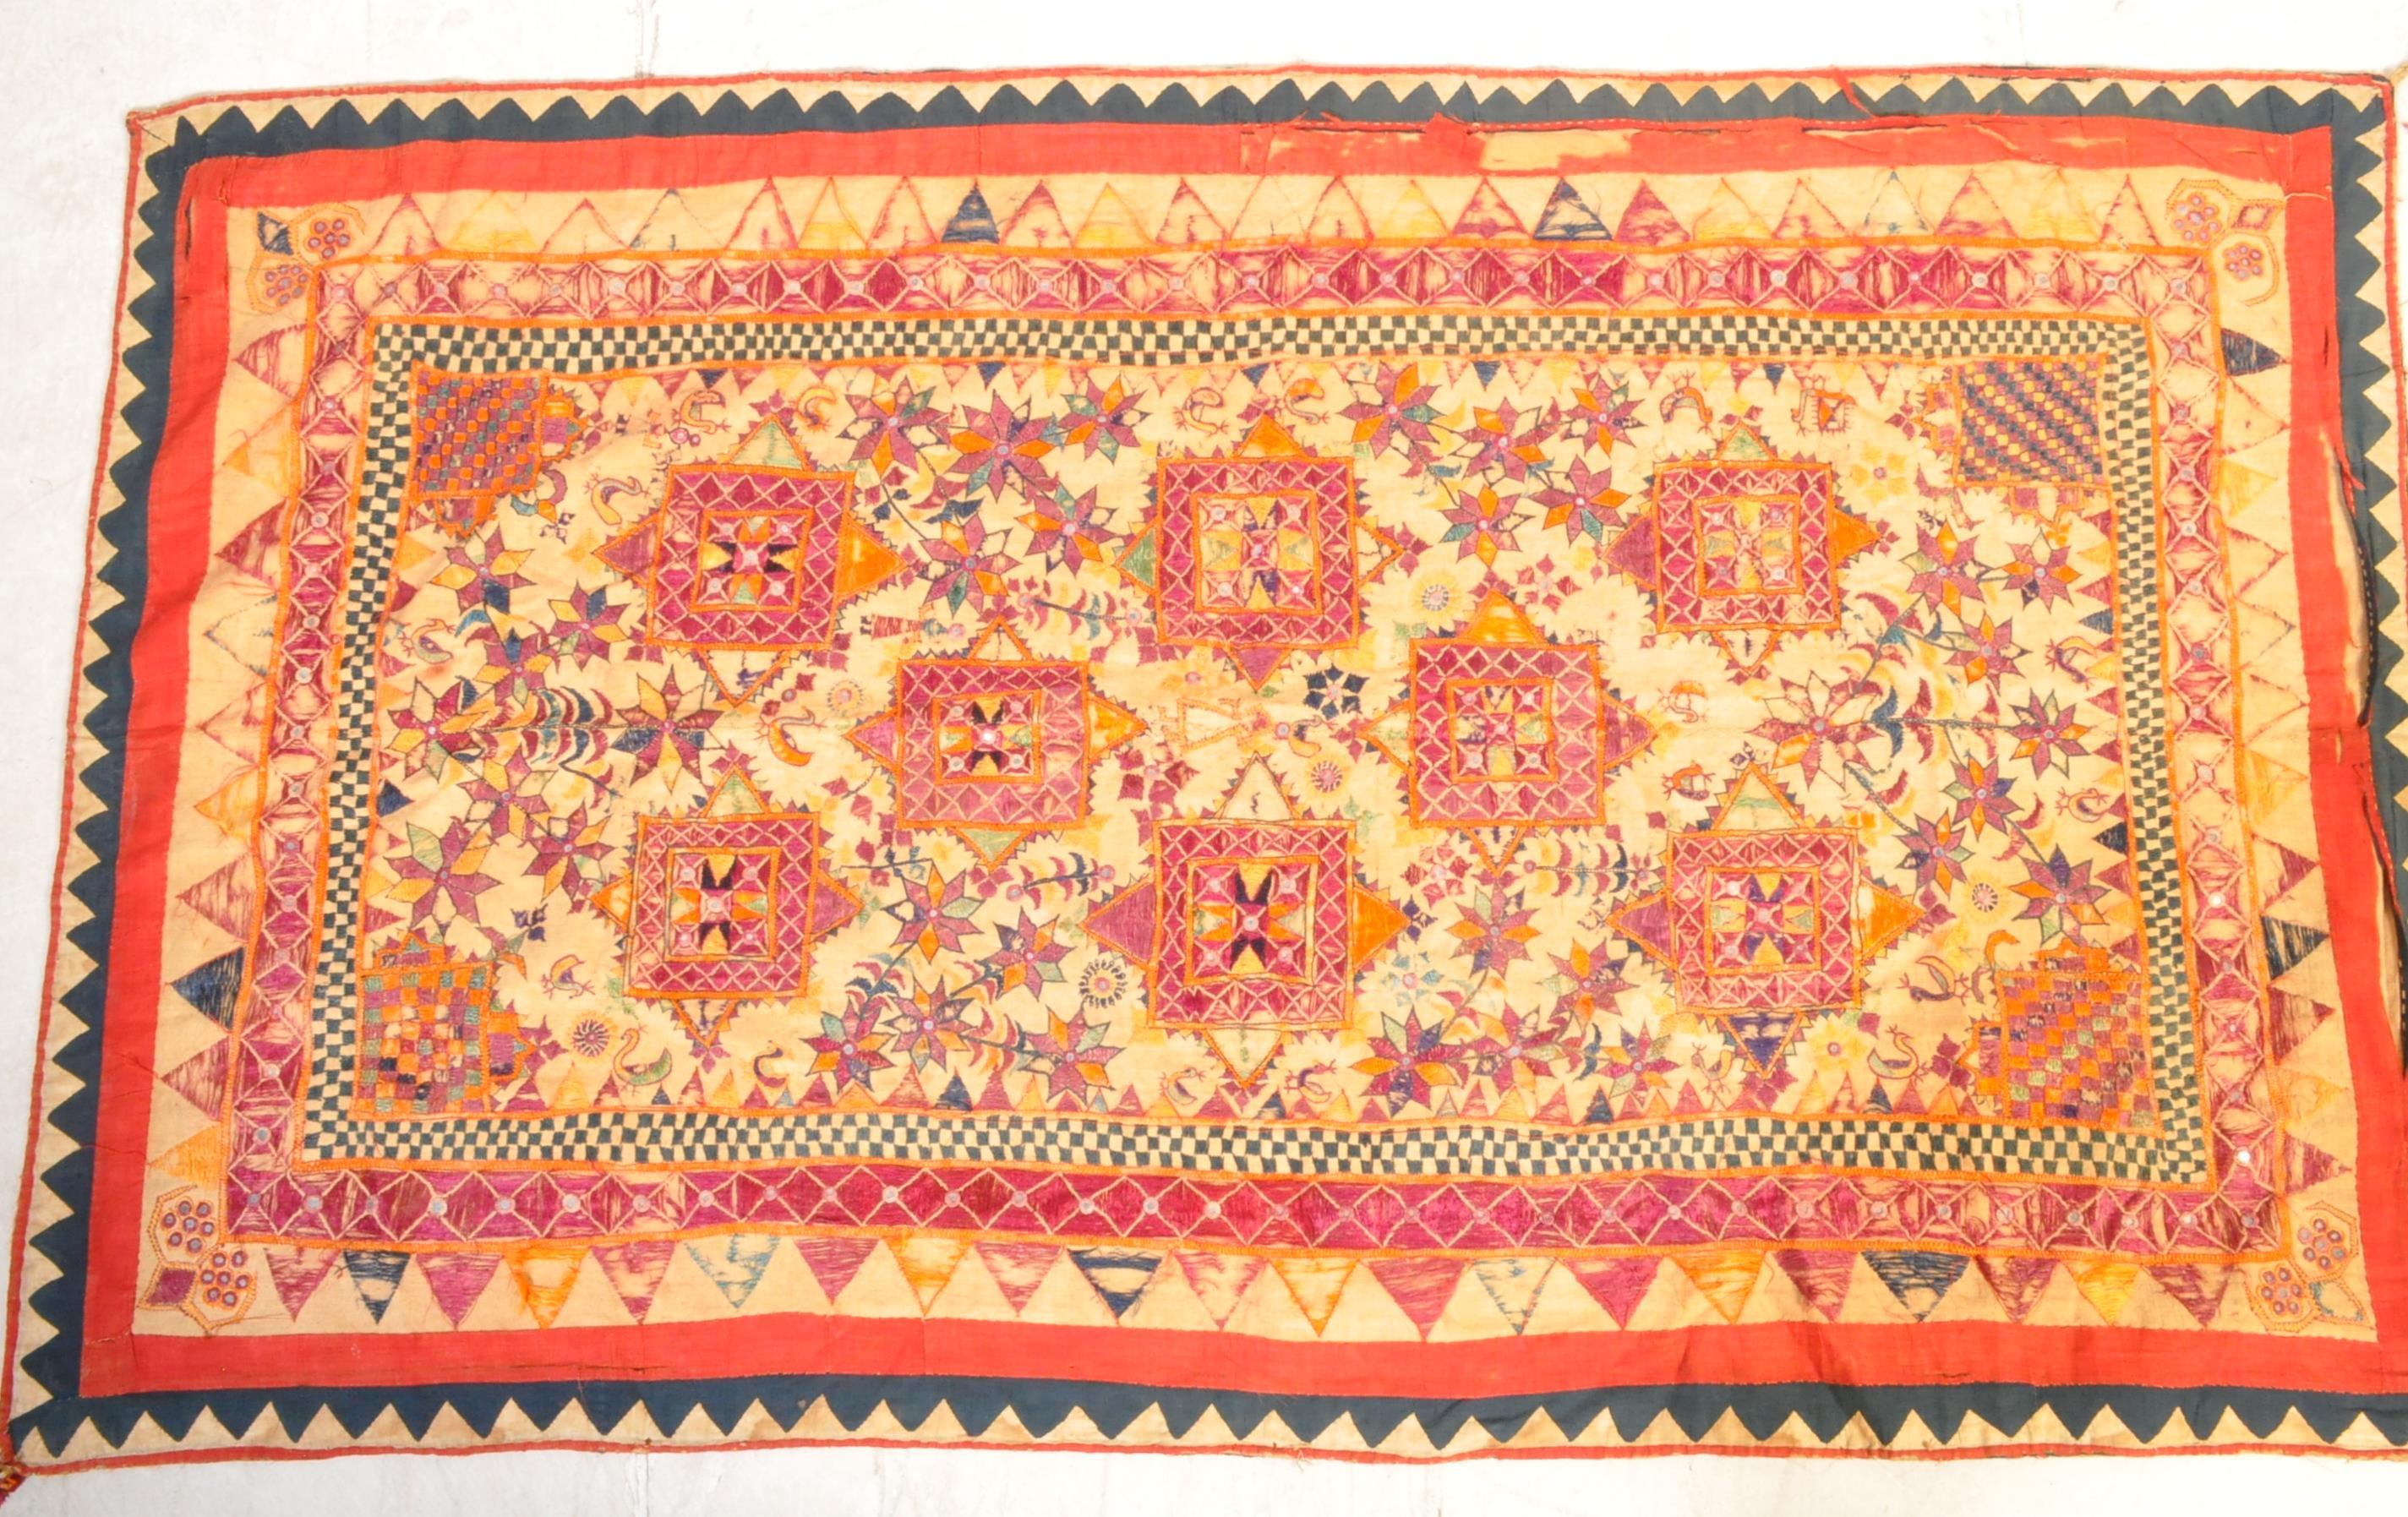 EARLY 20TH CENTURY INDIAN EMBROIDERED SHISHA TEXTILE - Image 7 of 7